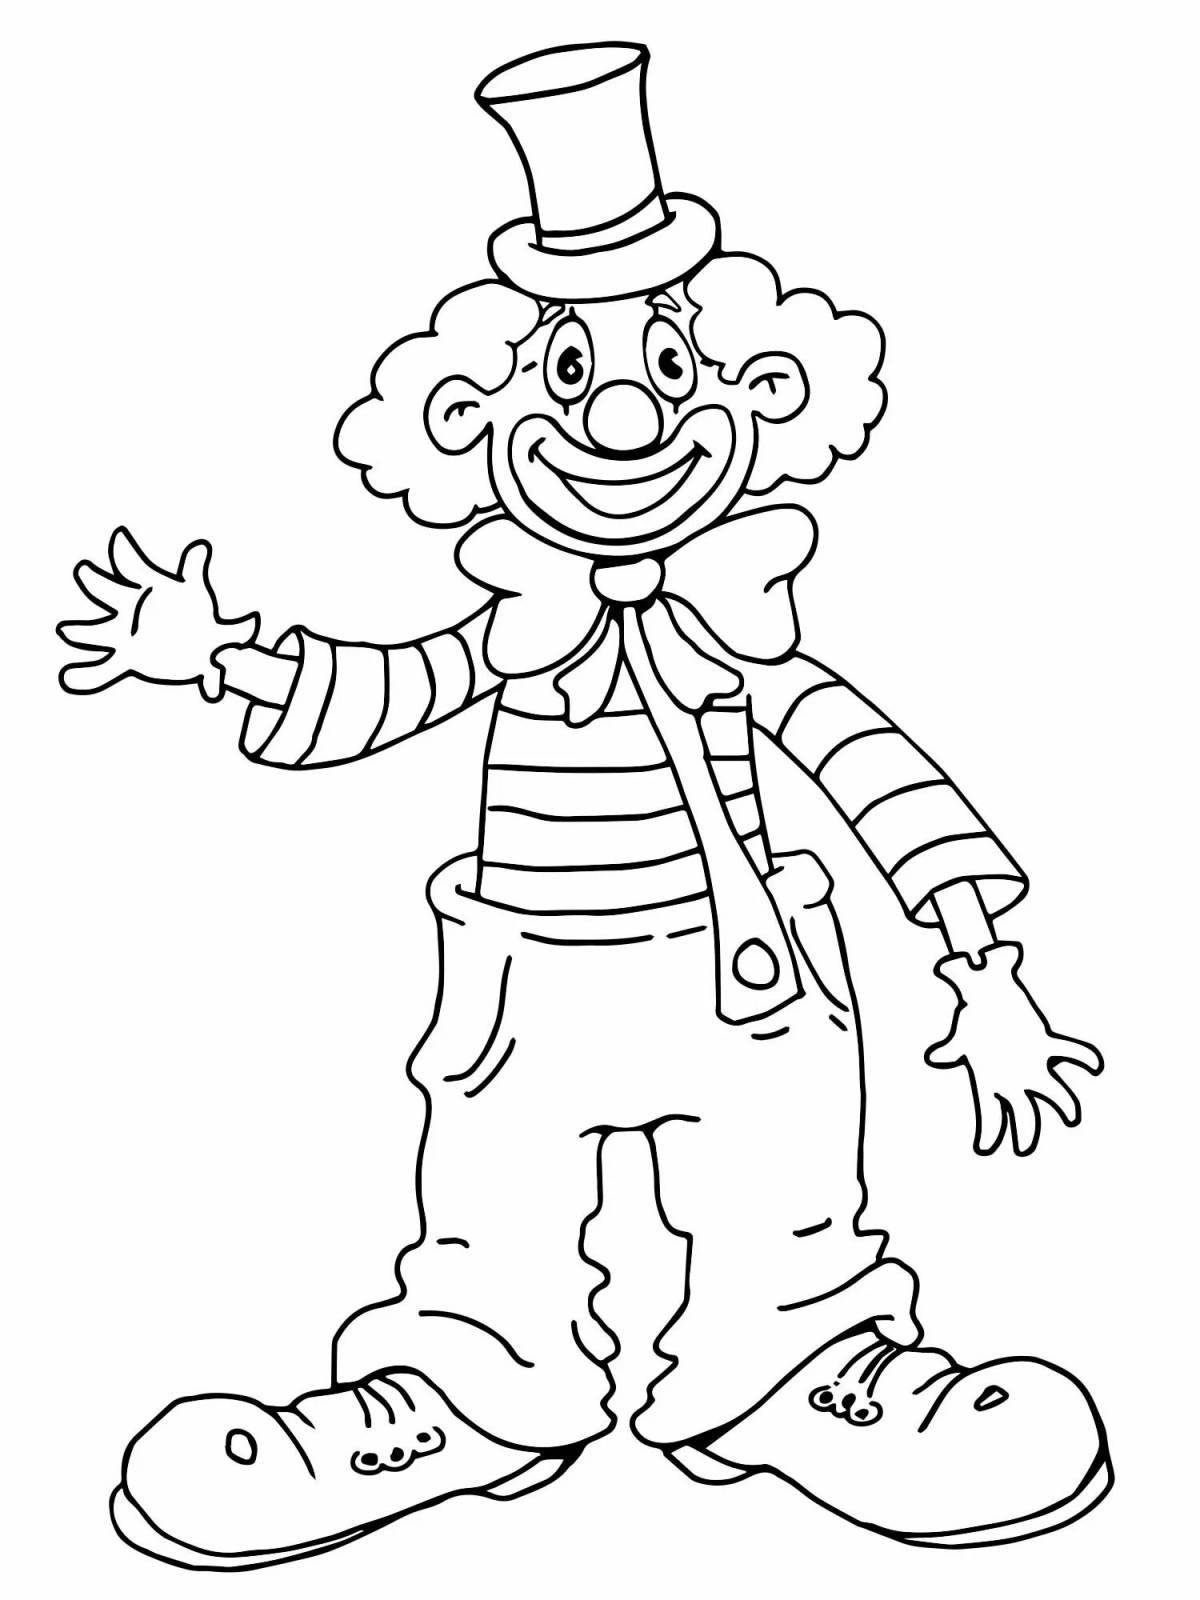 Coloring page of a cheerful clown